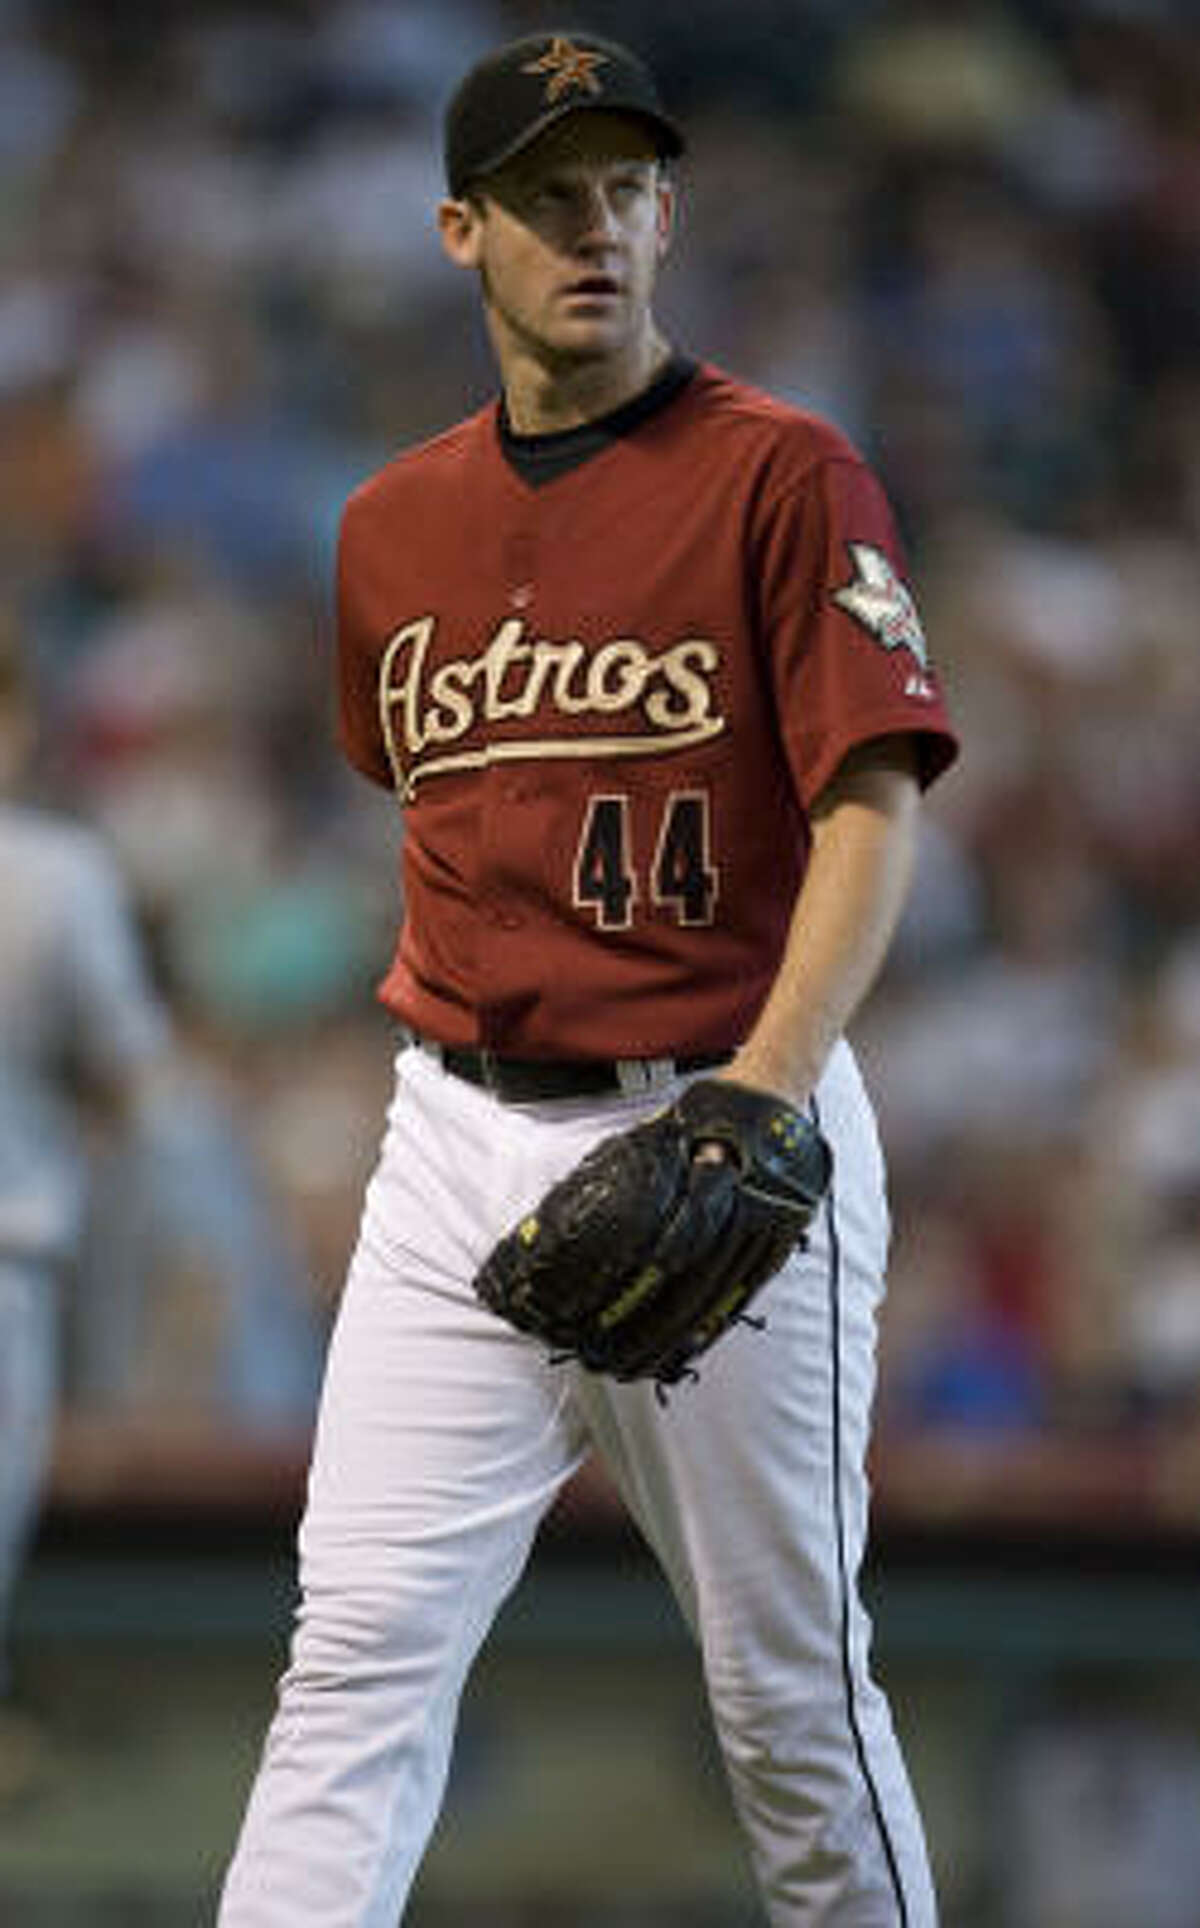 Astros pitcher Roy Oswalt hopes baseball institutes two record books, one for players who have used performance enhancing drugs and one for those who are clean.